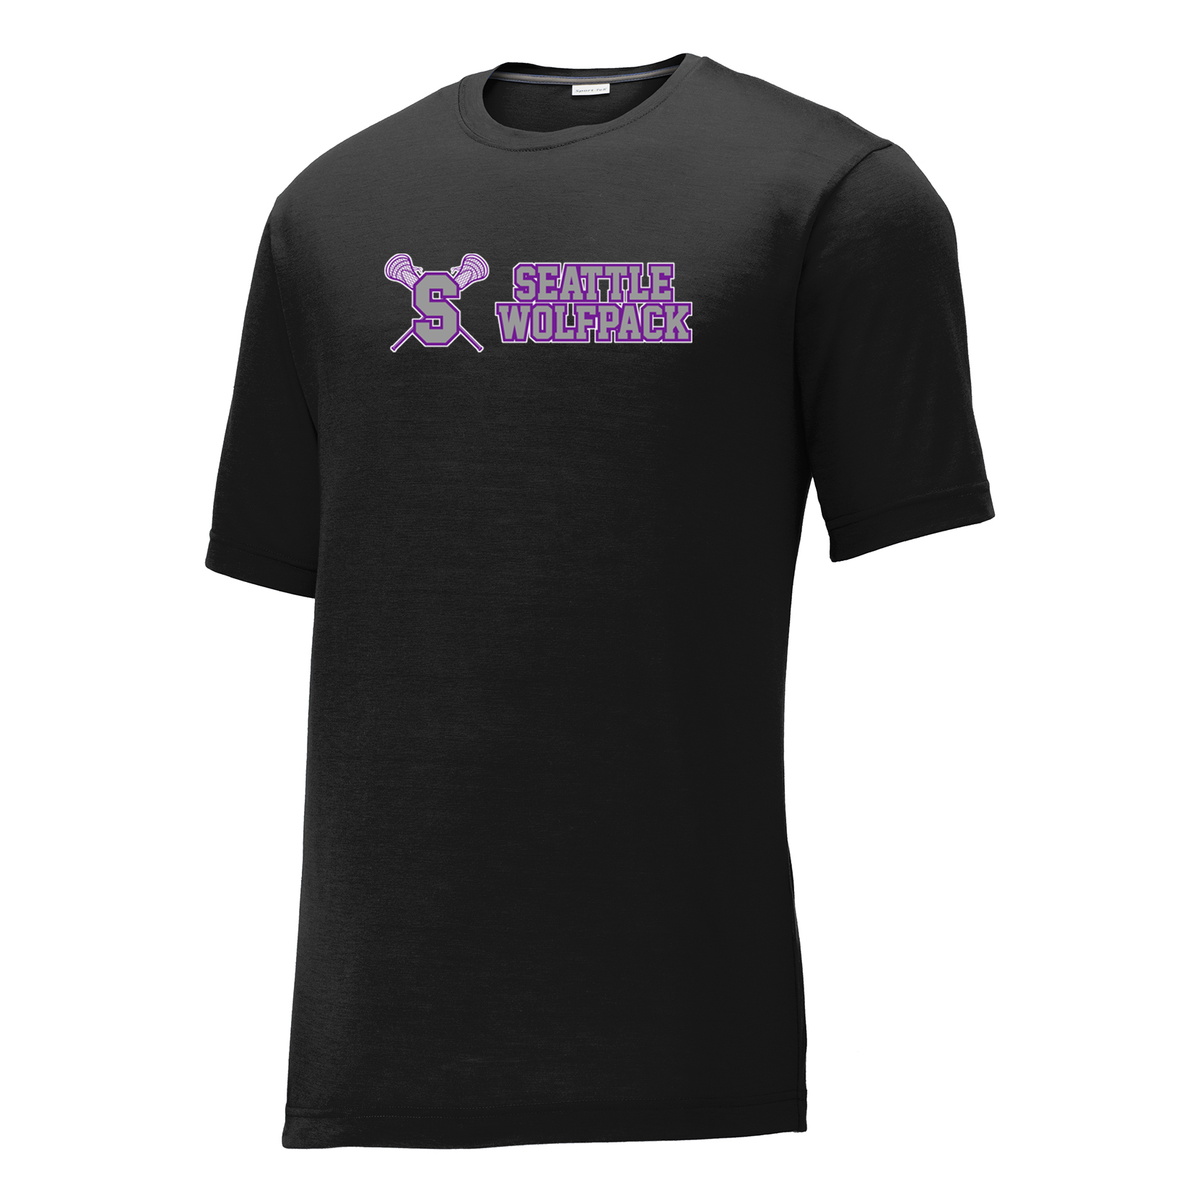 Seattle Wolfpack CottonTouch Performance T-Shirt